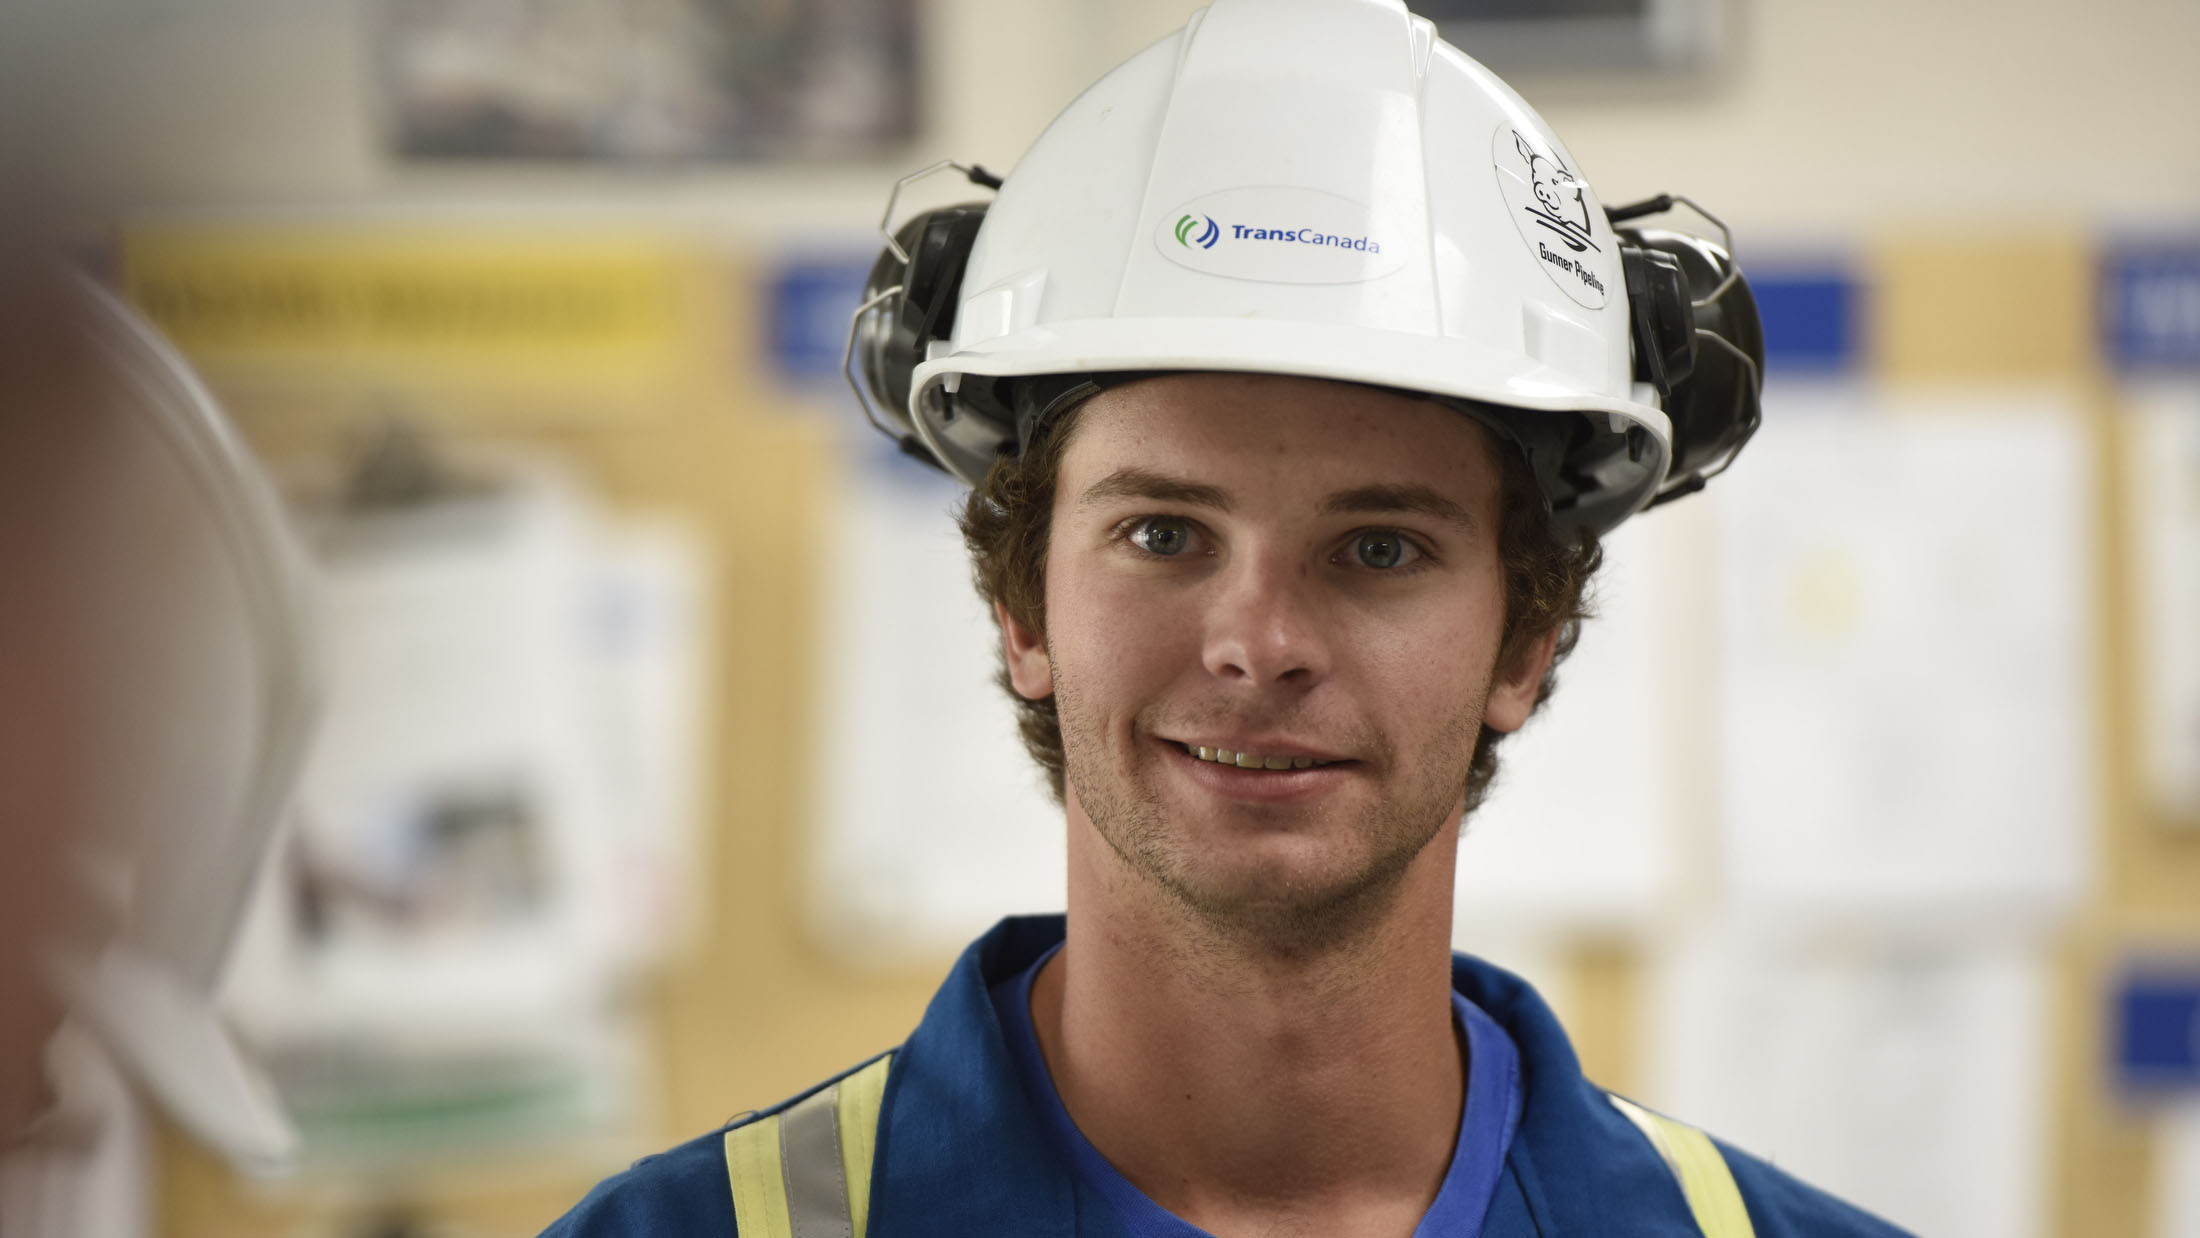 Twenty-six-year-old Inline Inspection Coordinator Philip Retzlaff said working with older, more experienced members of TransCanada's workforce provided him with invaluable experience during the PIG run.